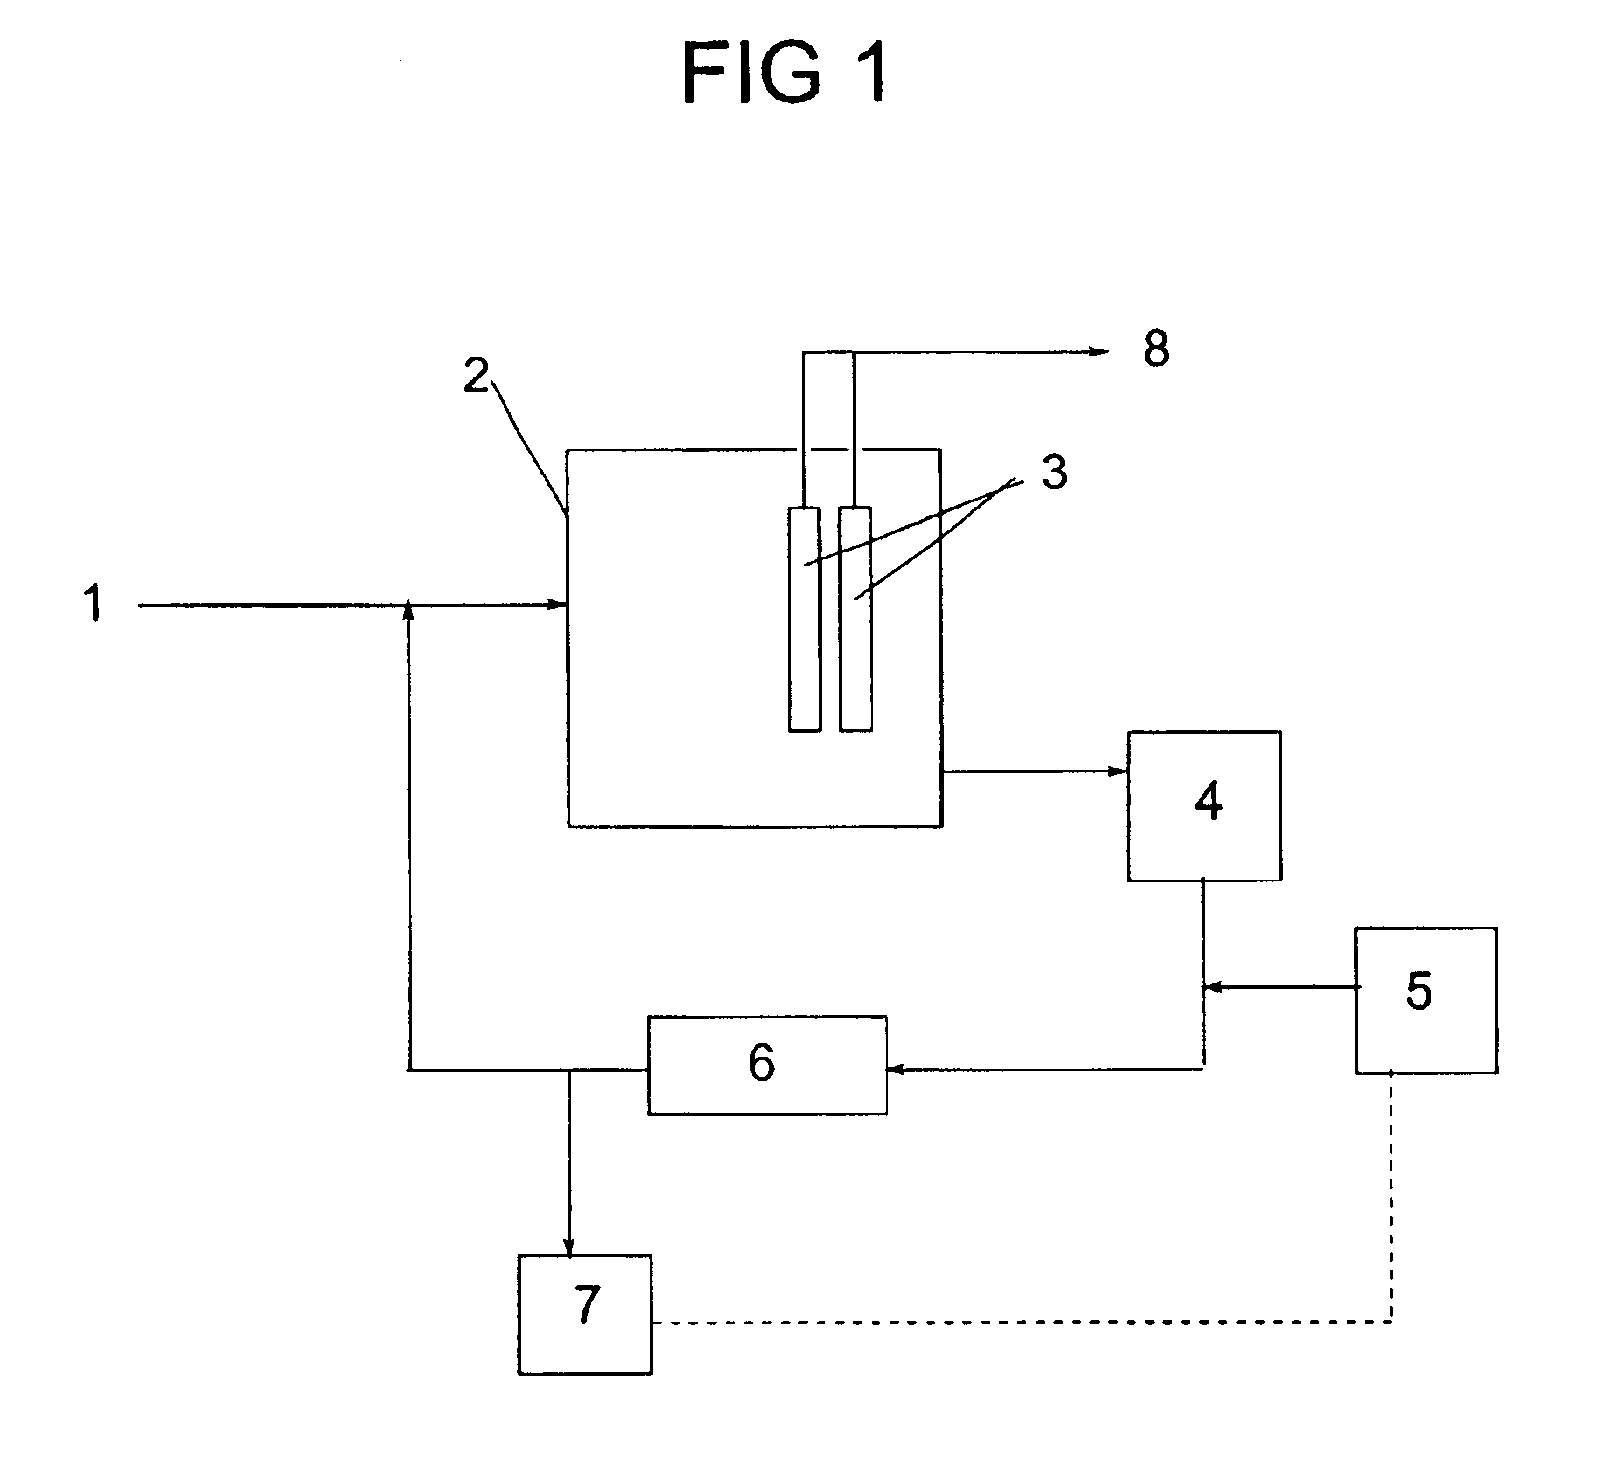 Method of using high molecular weight water soluble polymers in membrane bioreactor systems